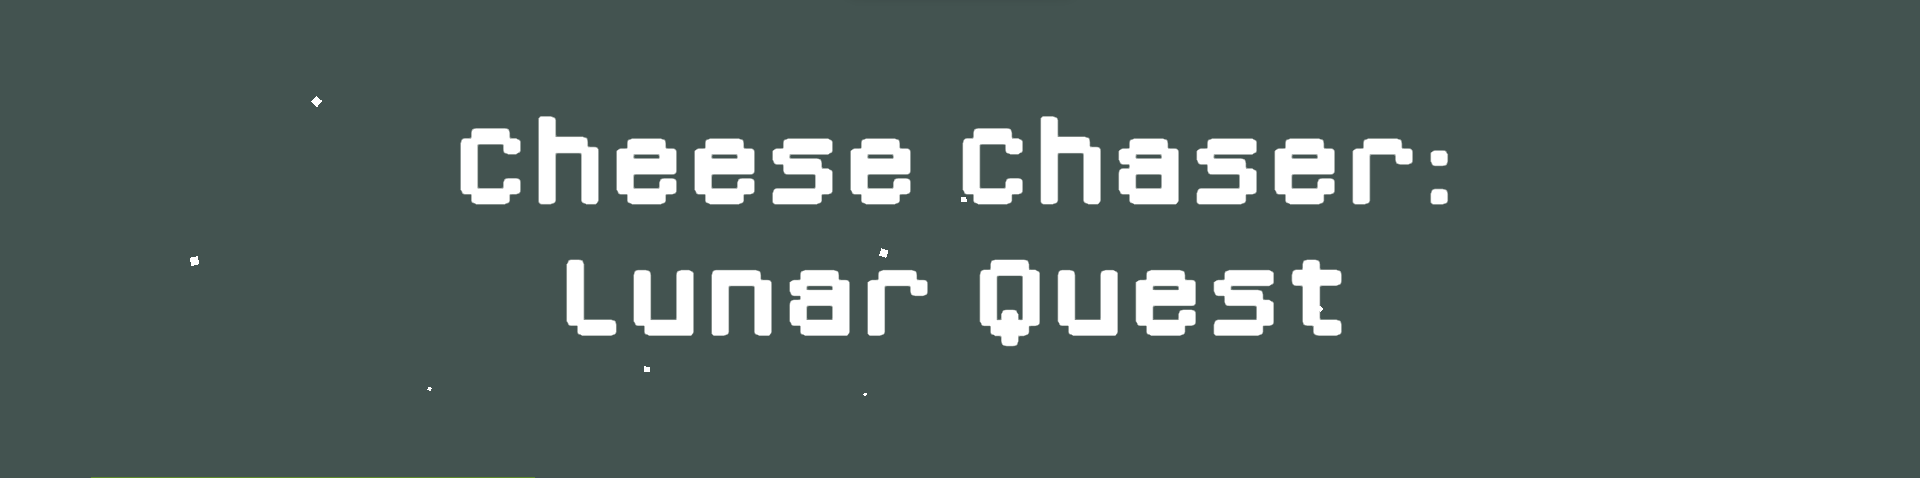 Cheese Chaser: Lunar Quest